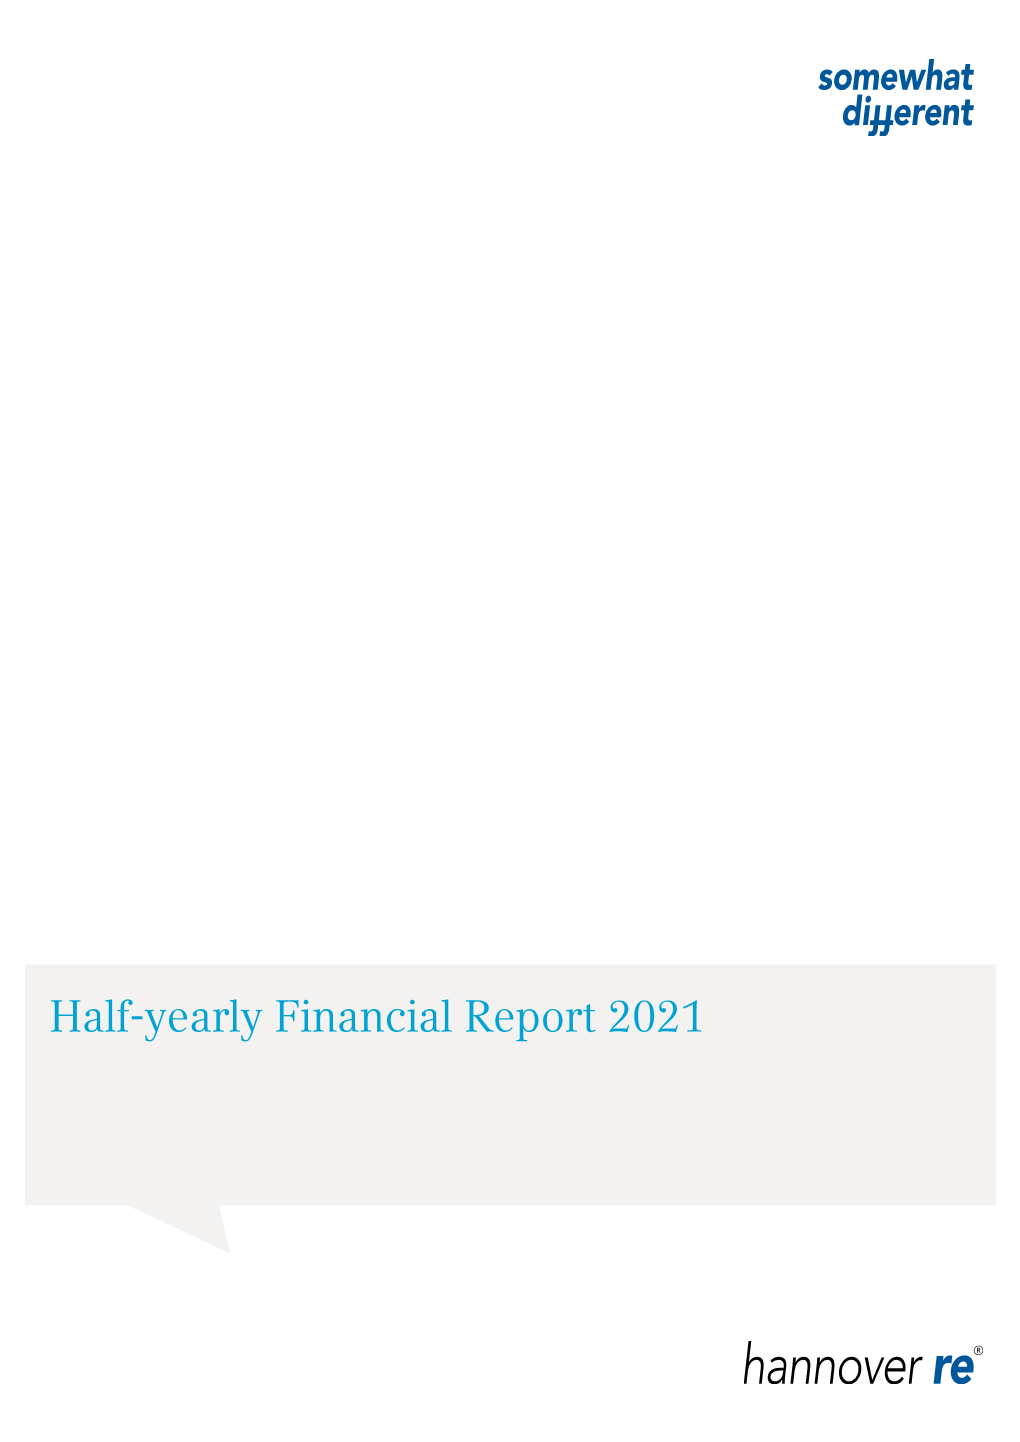 Half-Yearly Financial Report 2021 Key Figures